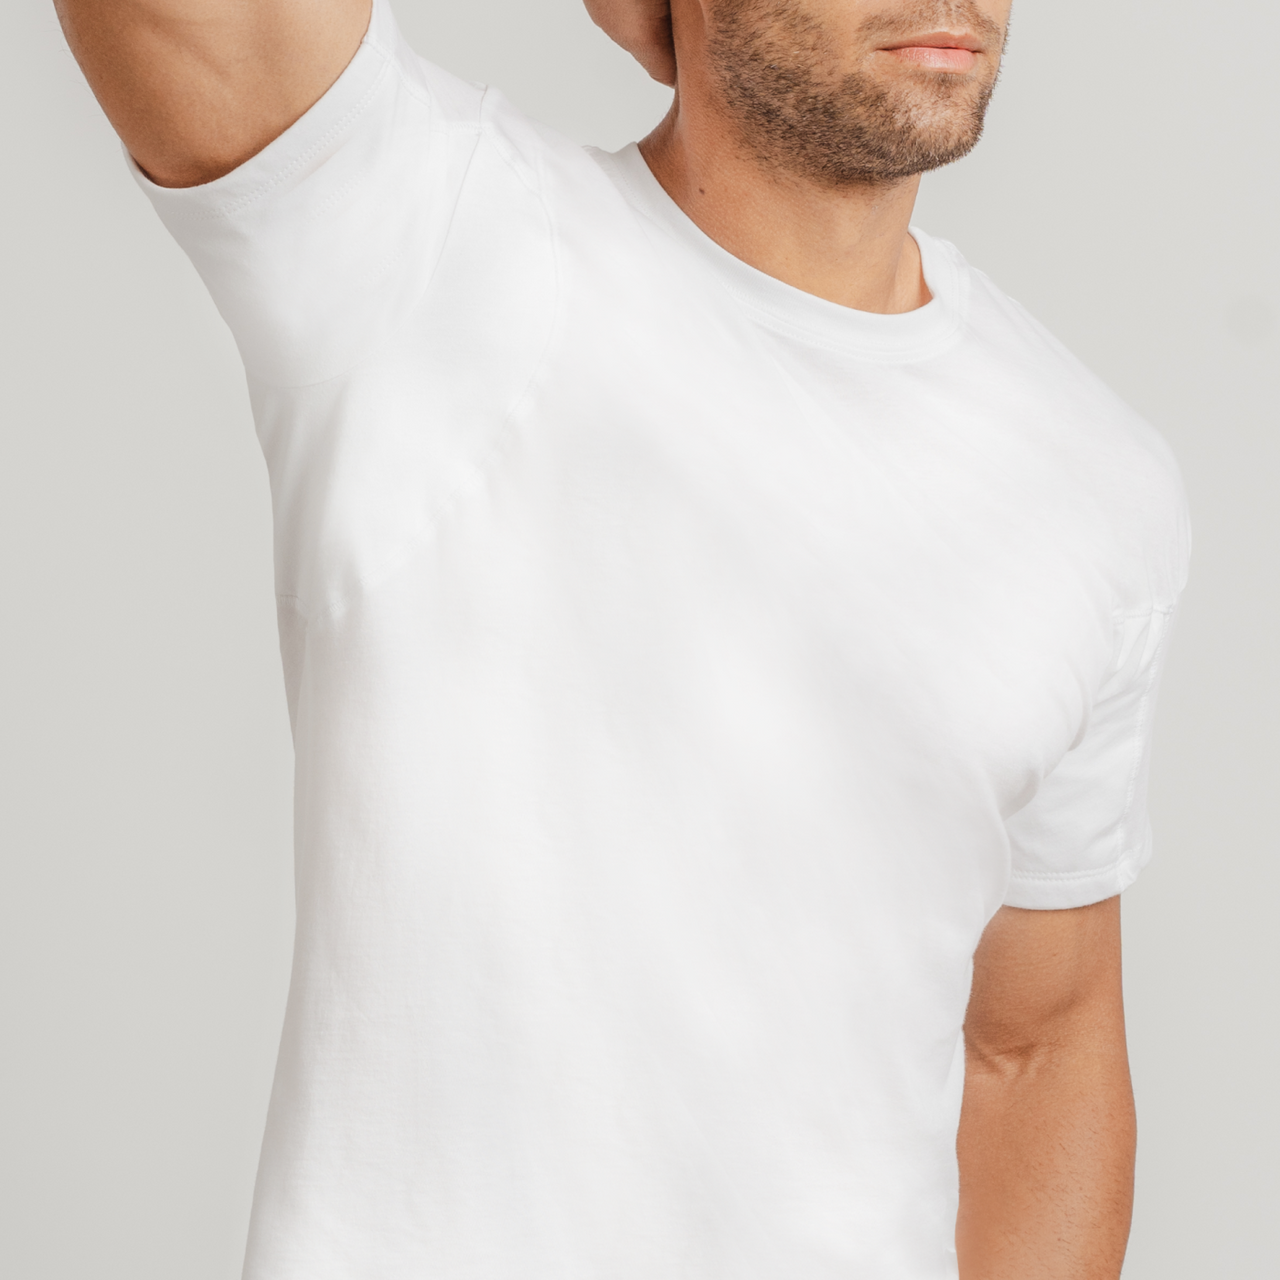 Shop Underarm Sweat Pads Tshirt with great discounts and prices